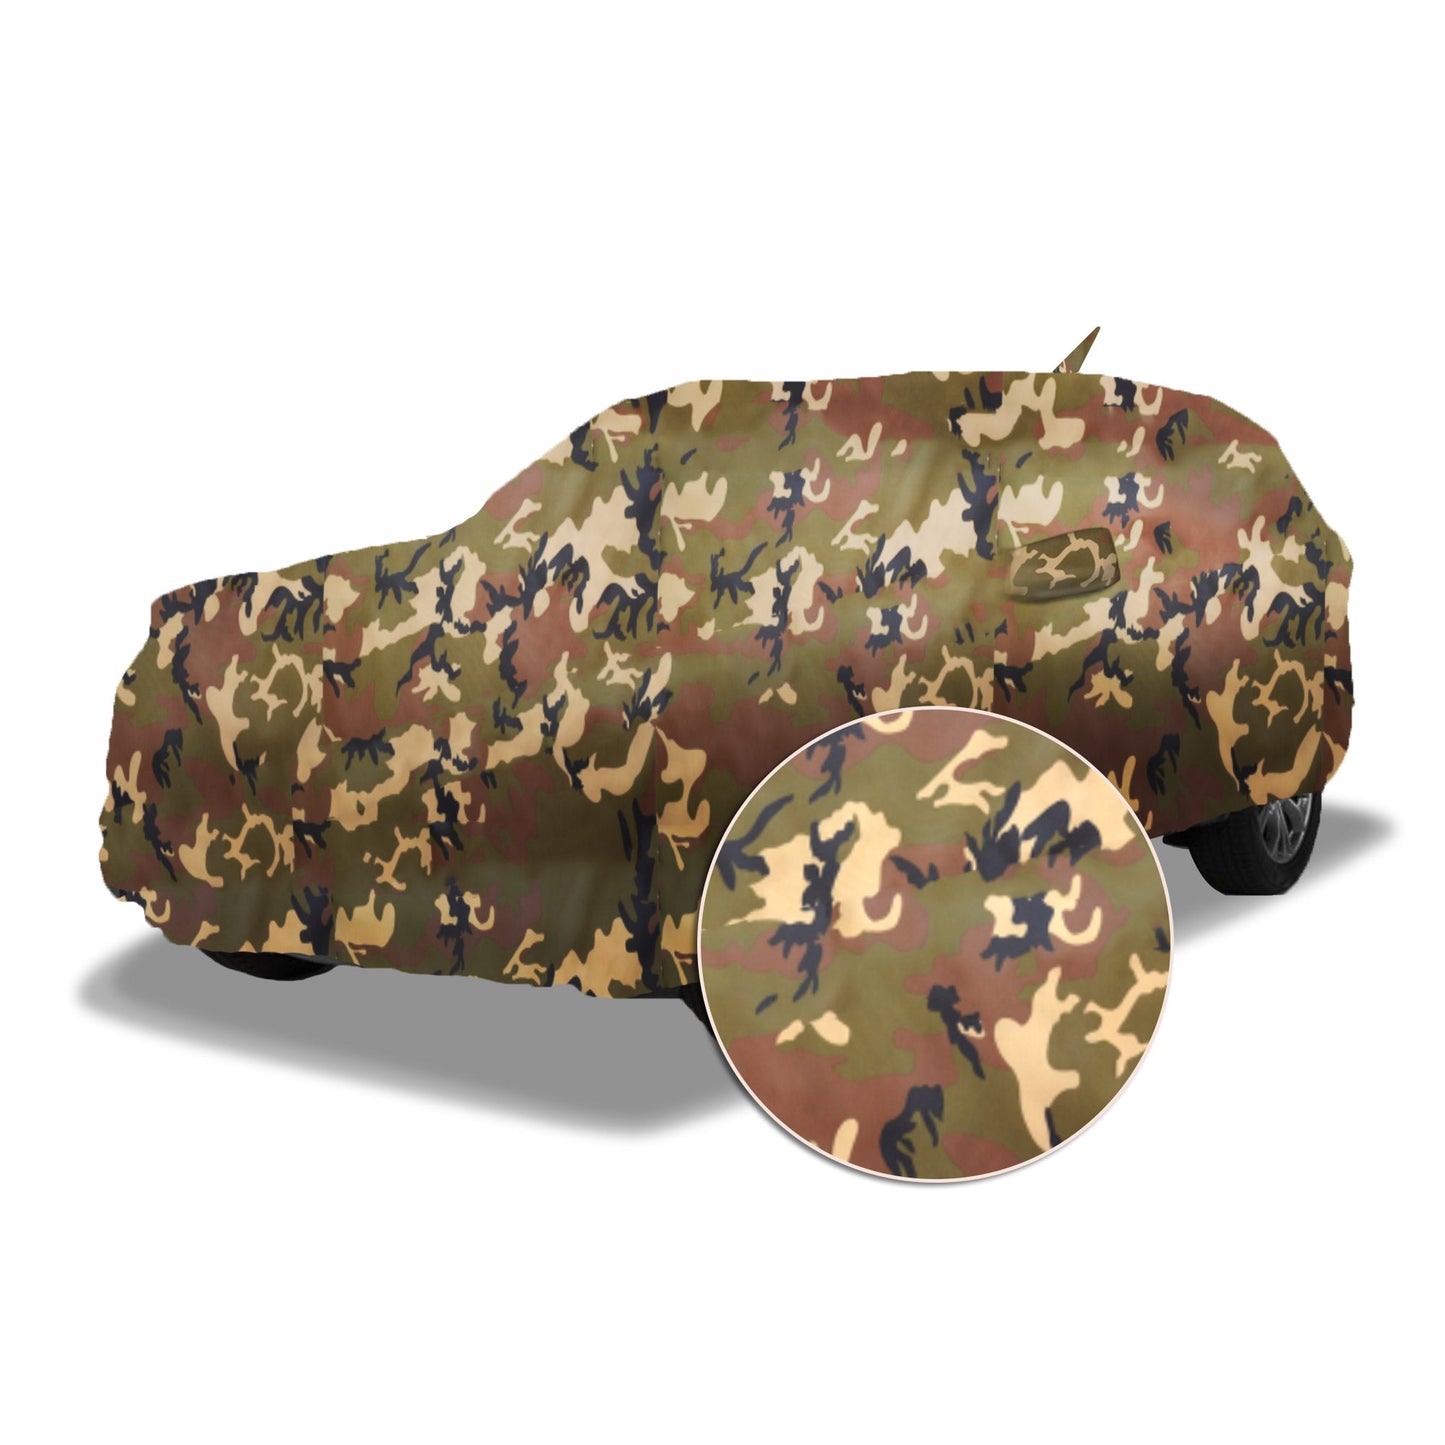 Ascot Tata Safari Storme Car Body Cover Extra Strong & Dust Proof Jungle Military Car Cover with UV Proof & Water-Resistant Coating